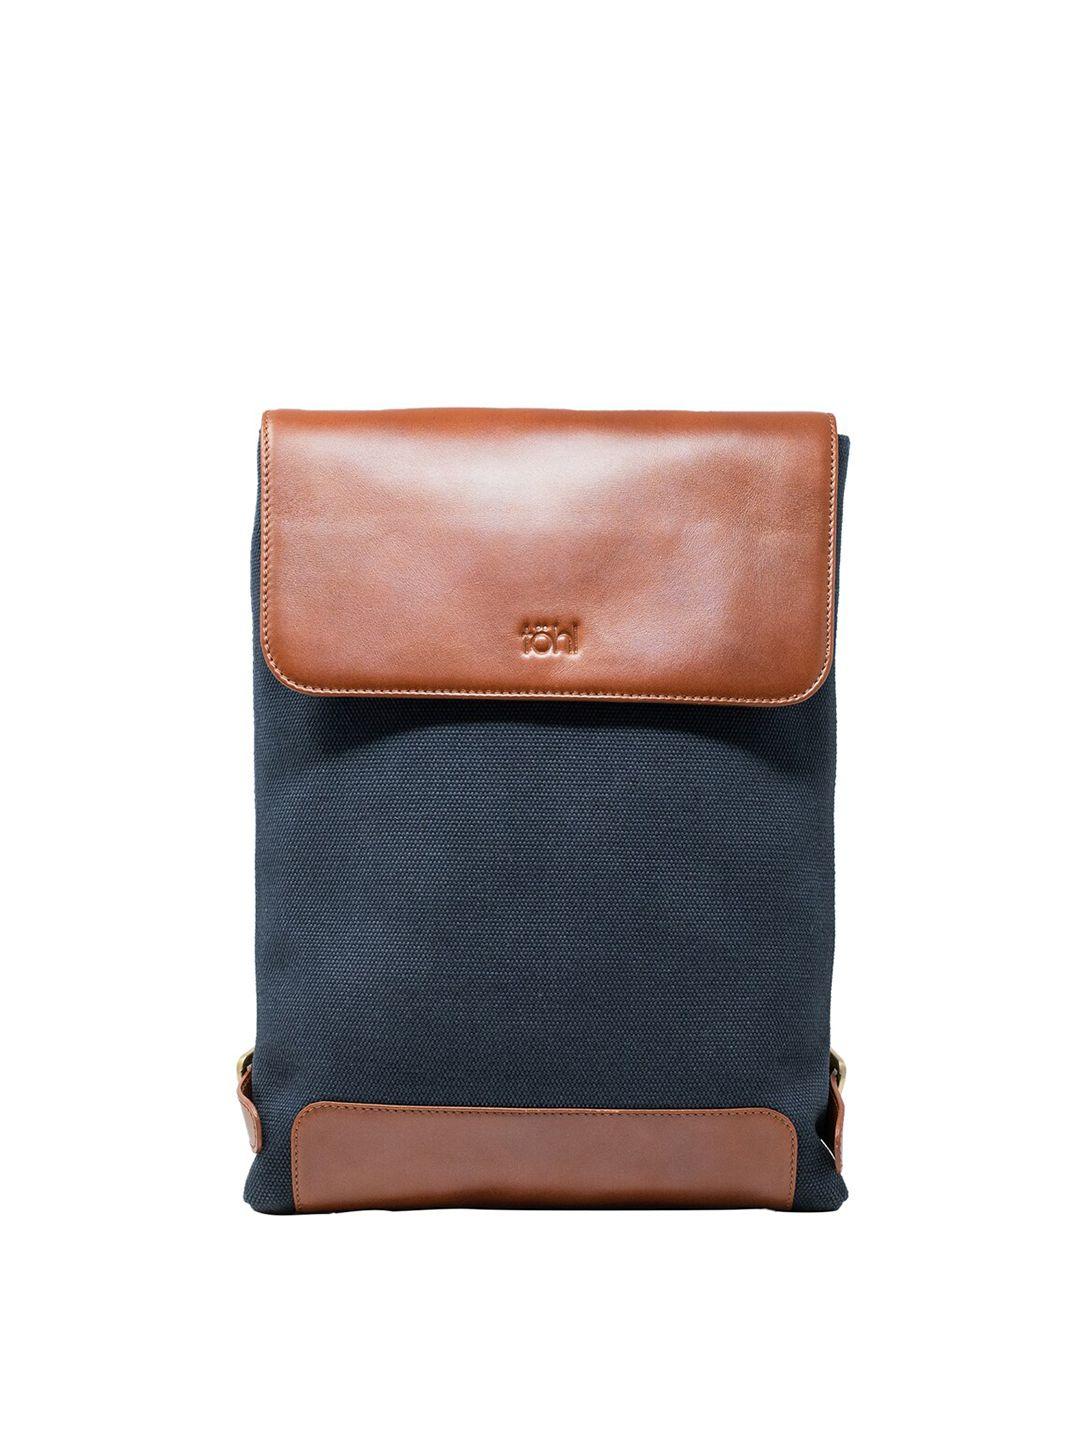 tohl unisex tan & navy blue leather 15 inch laptop sleeve